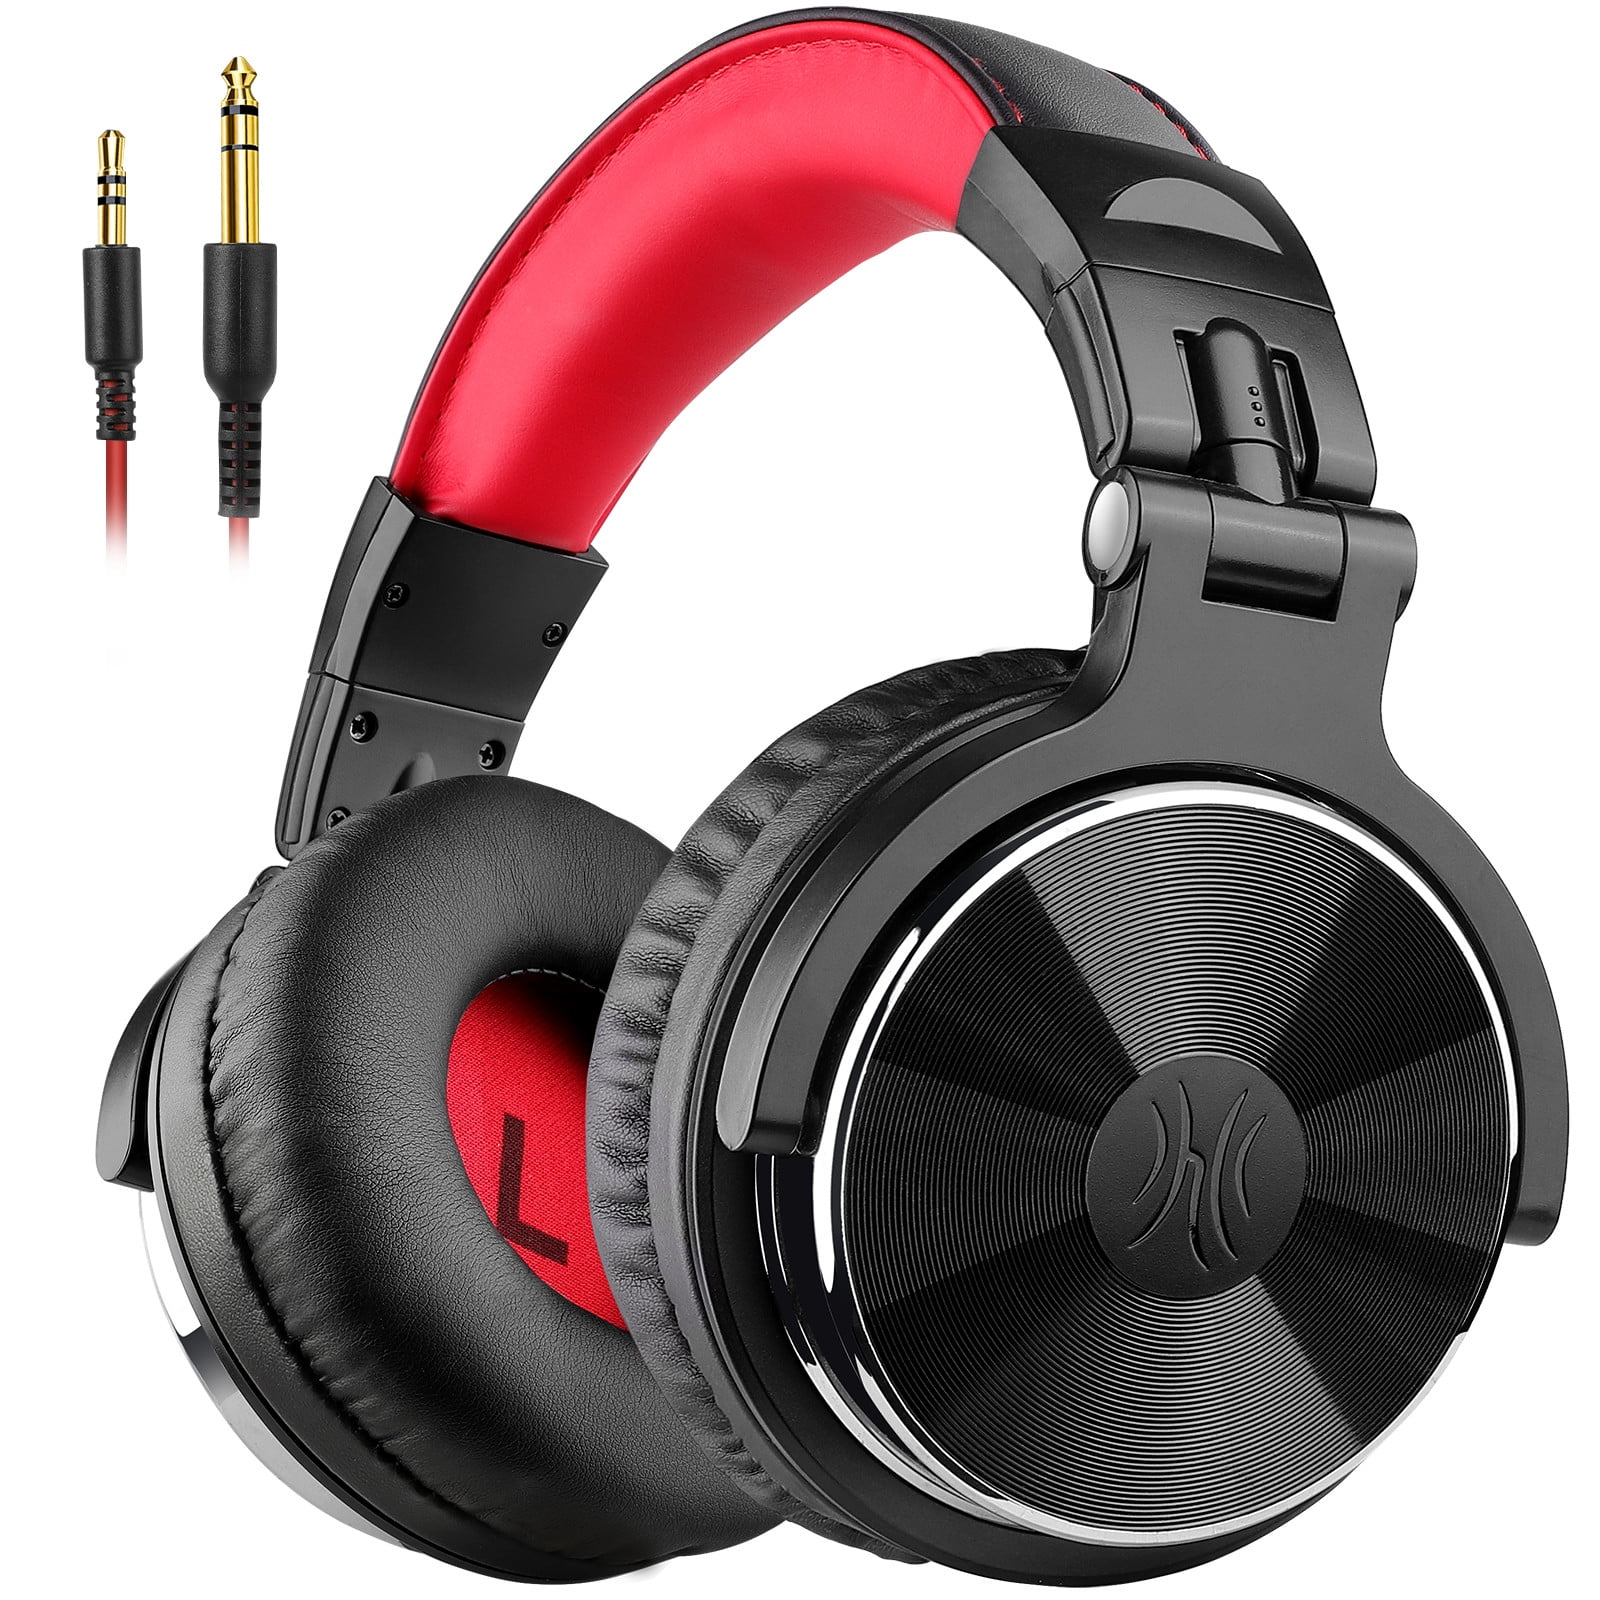 OneOdio Studio Gaming Portable Wired Over Ear Headphones w/Boom Mic, Black  A71 Black - The Home Depot